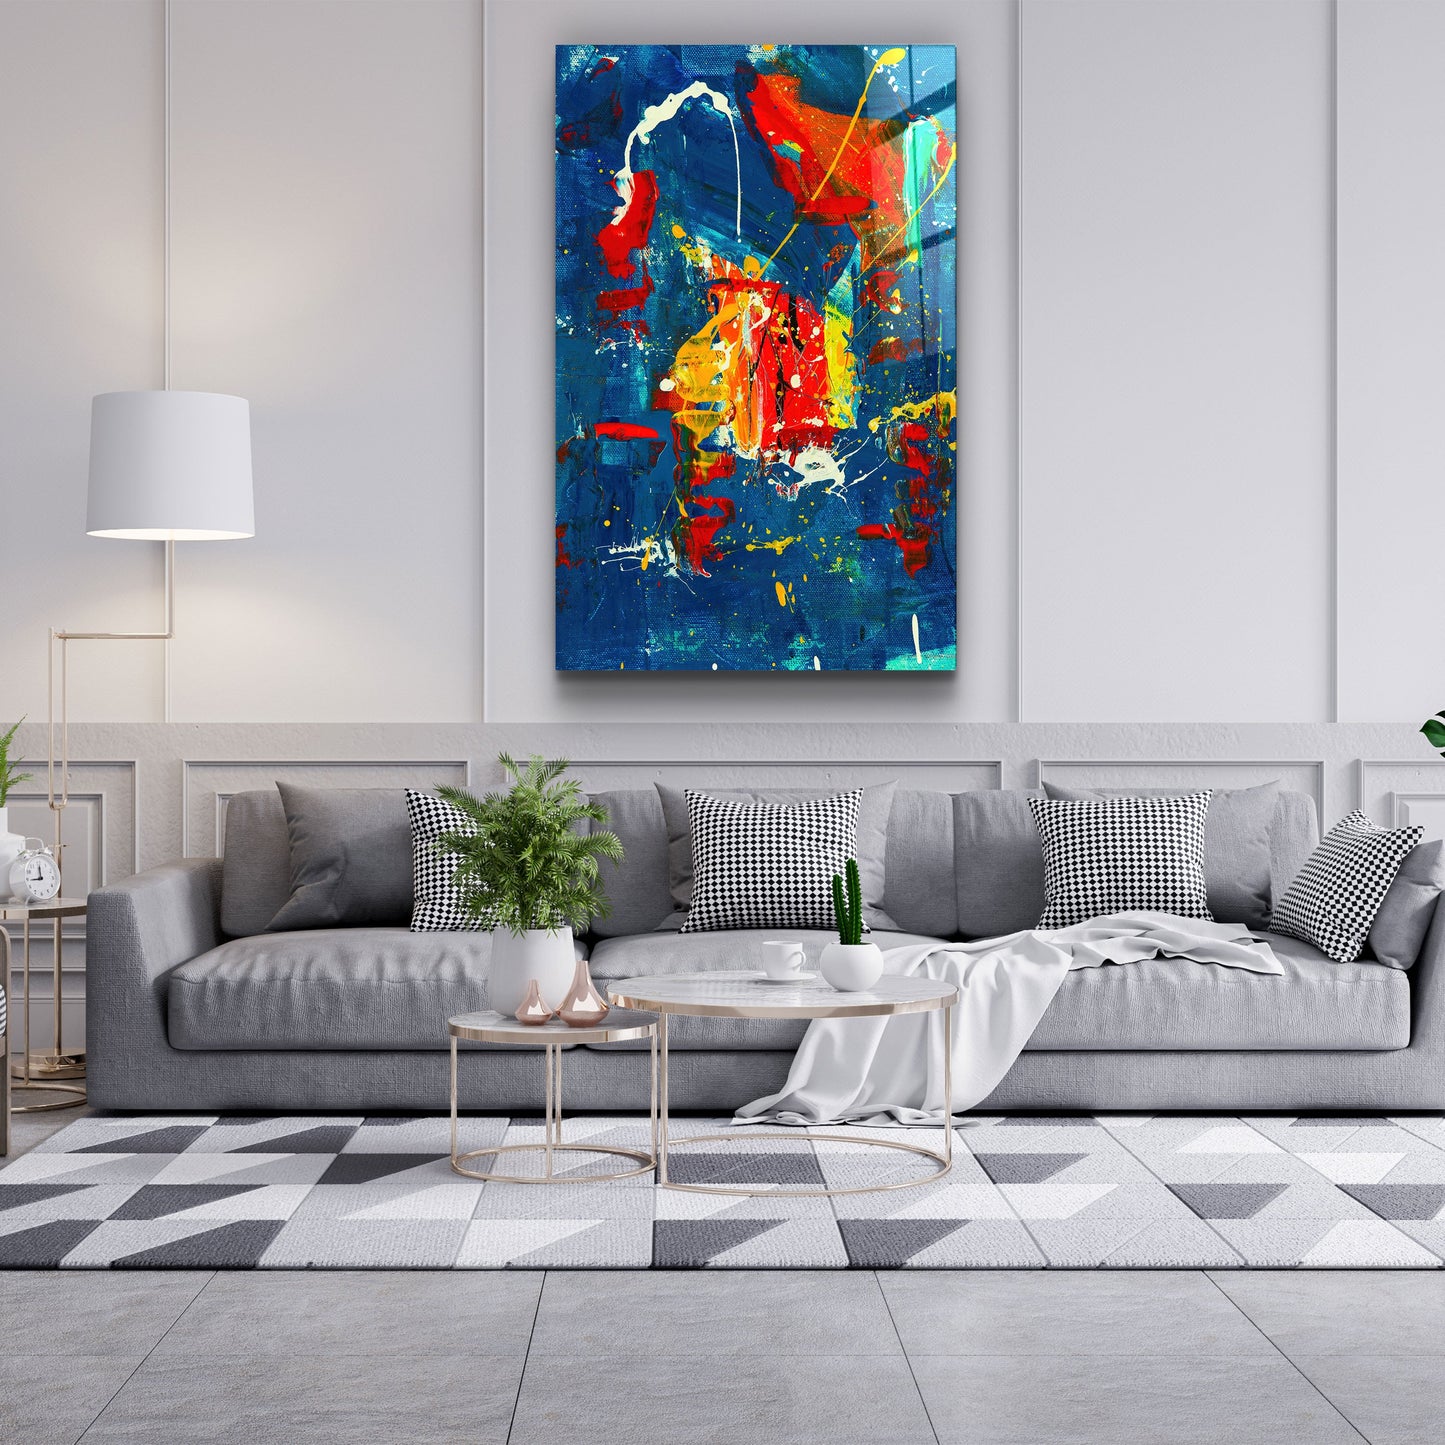 Oil Painting - Abstract - Designer's Collection Glass Wall Art